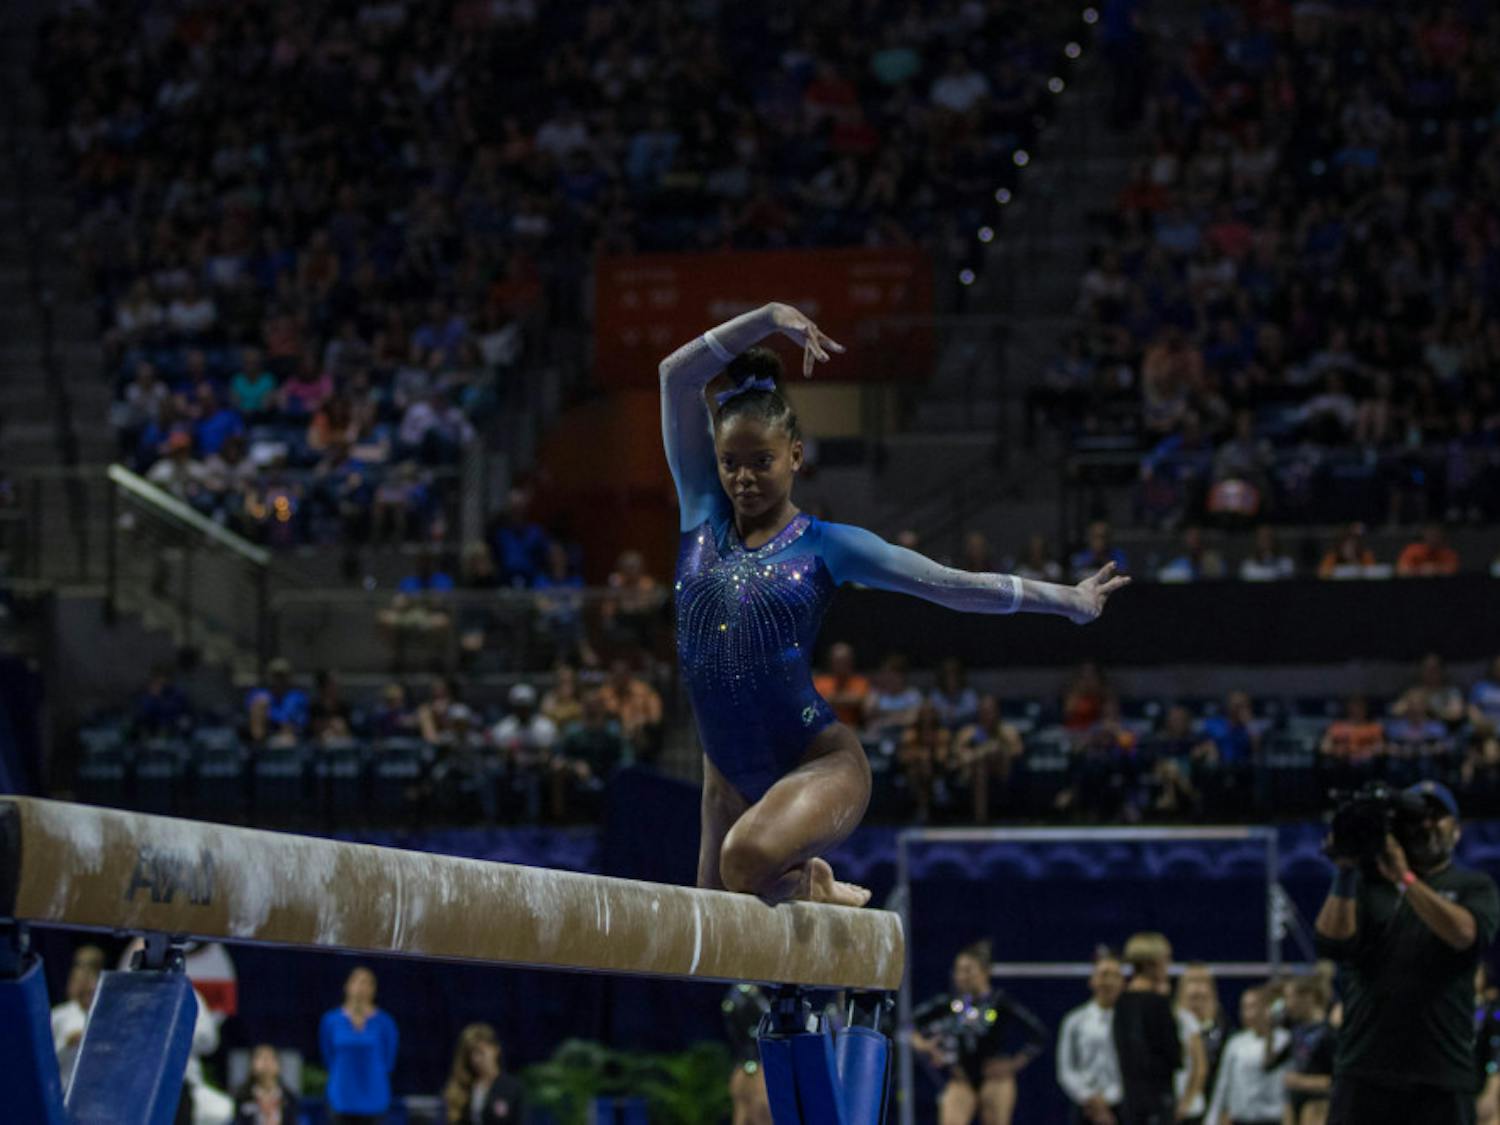 Florida gymnast Trinity Thomas was named SEC Gymnast of the Week following her performance against Georgia on Friday. She collected 9.975s in both floor and bars.
&nbsp;